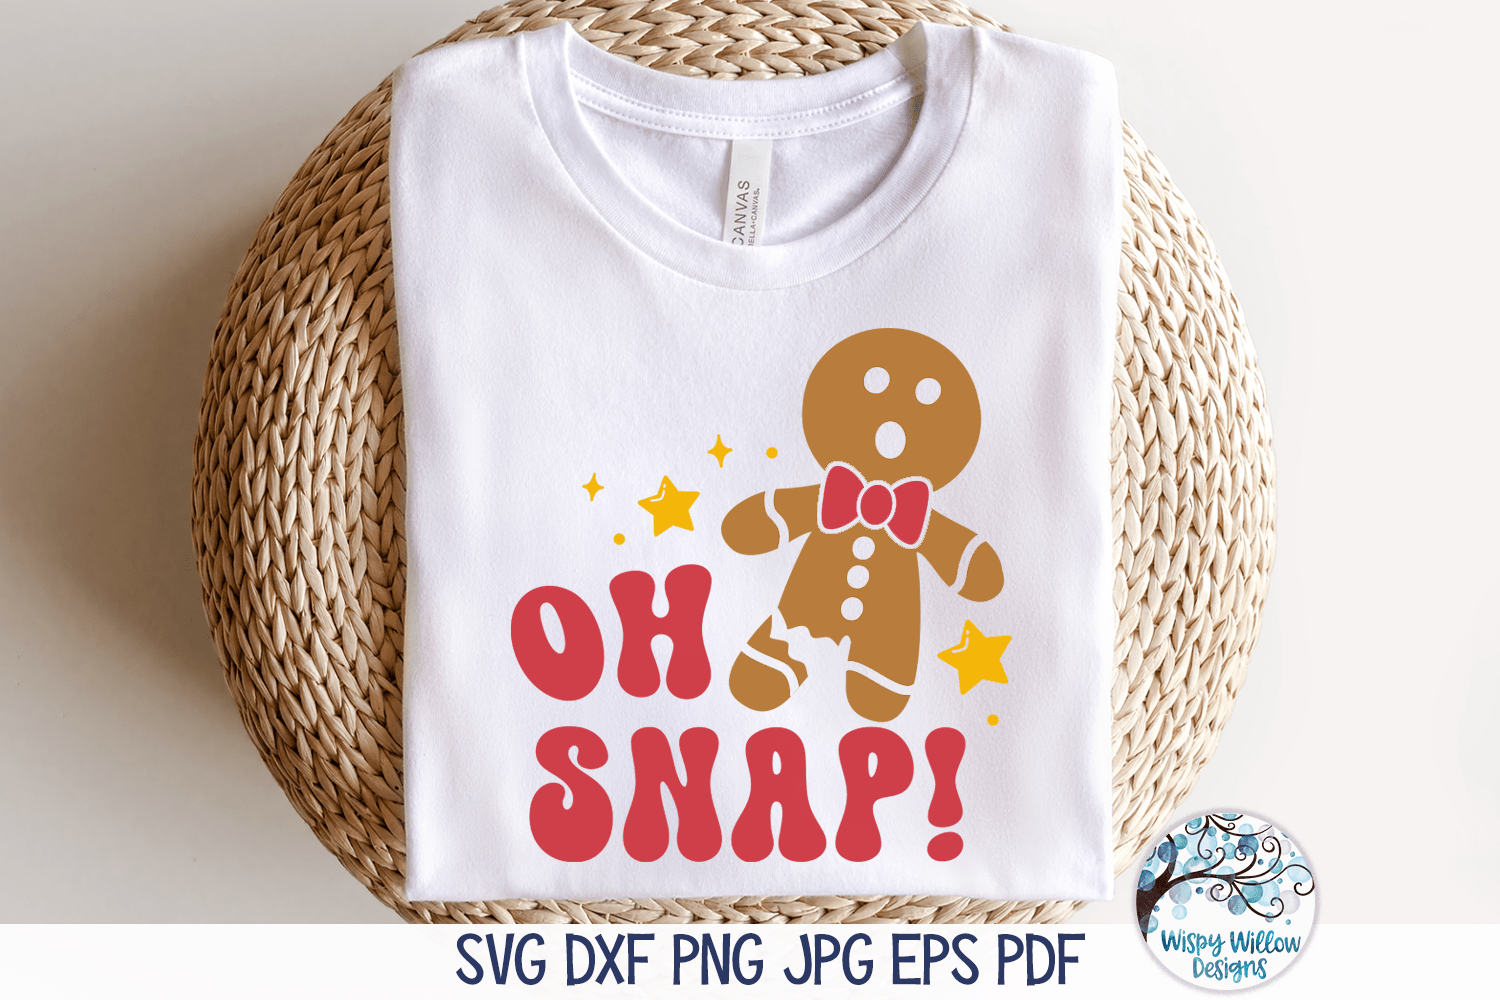 Oh Snap SVG | Funny Gingerbread Man Cookie Wispy Willow Designs Company